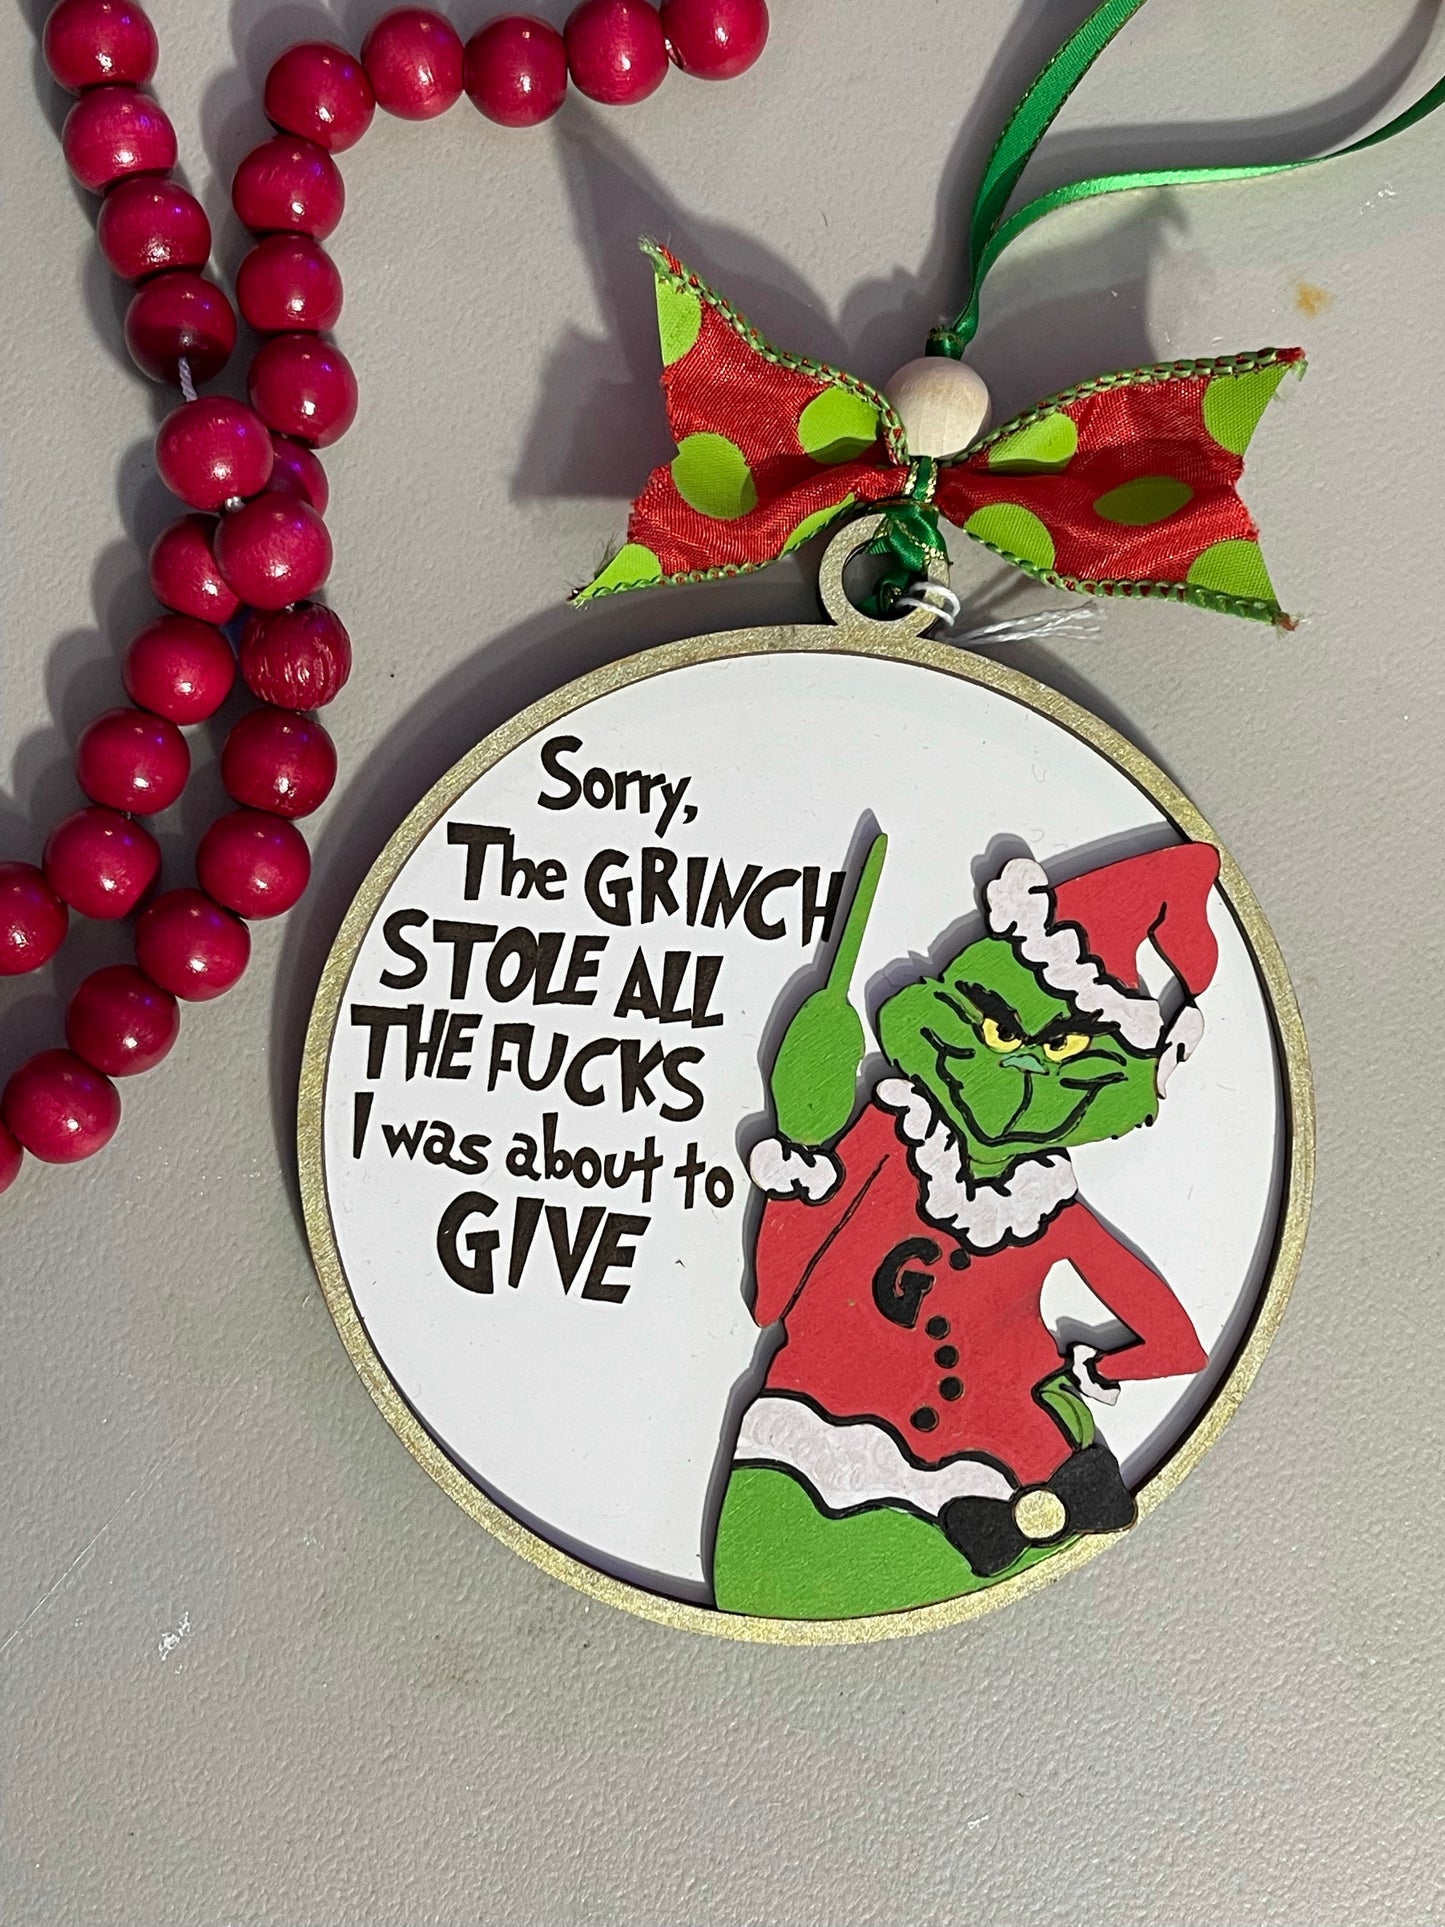 He stole all the F’s ornament